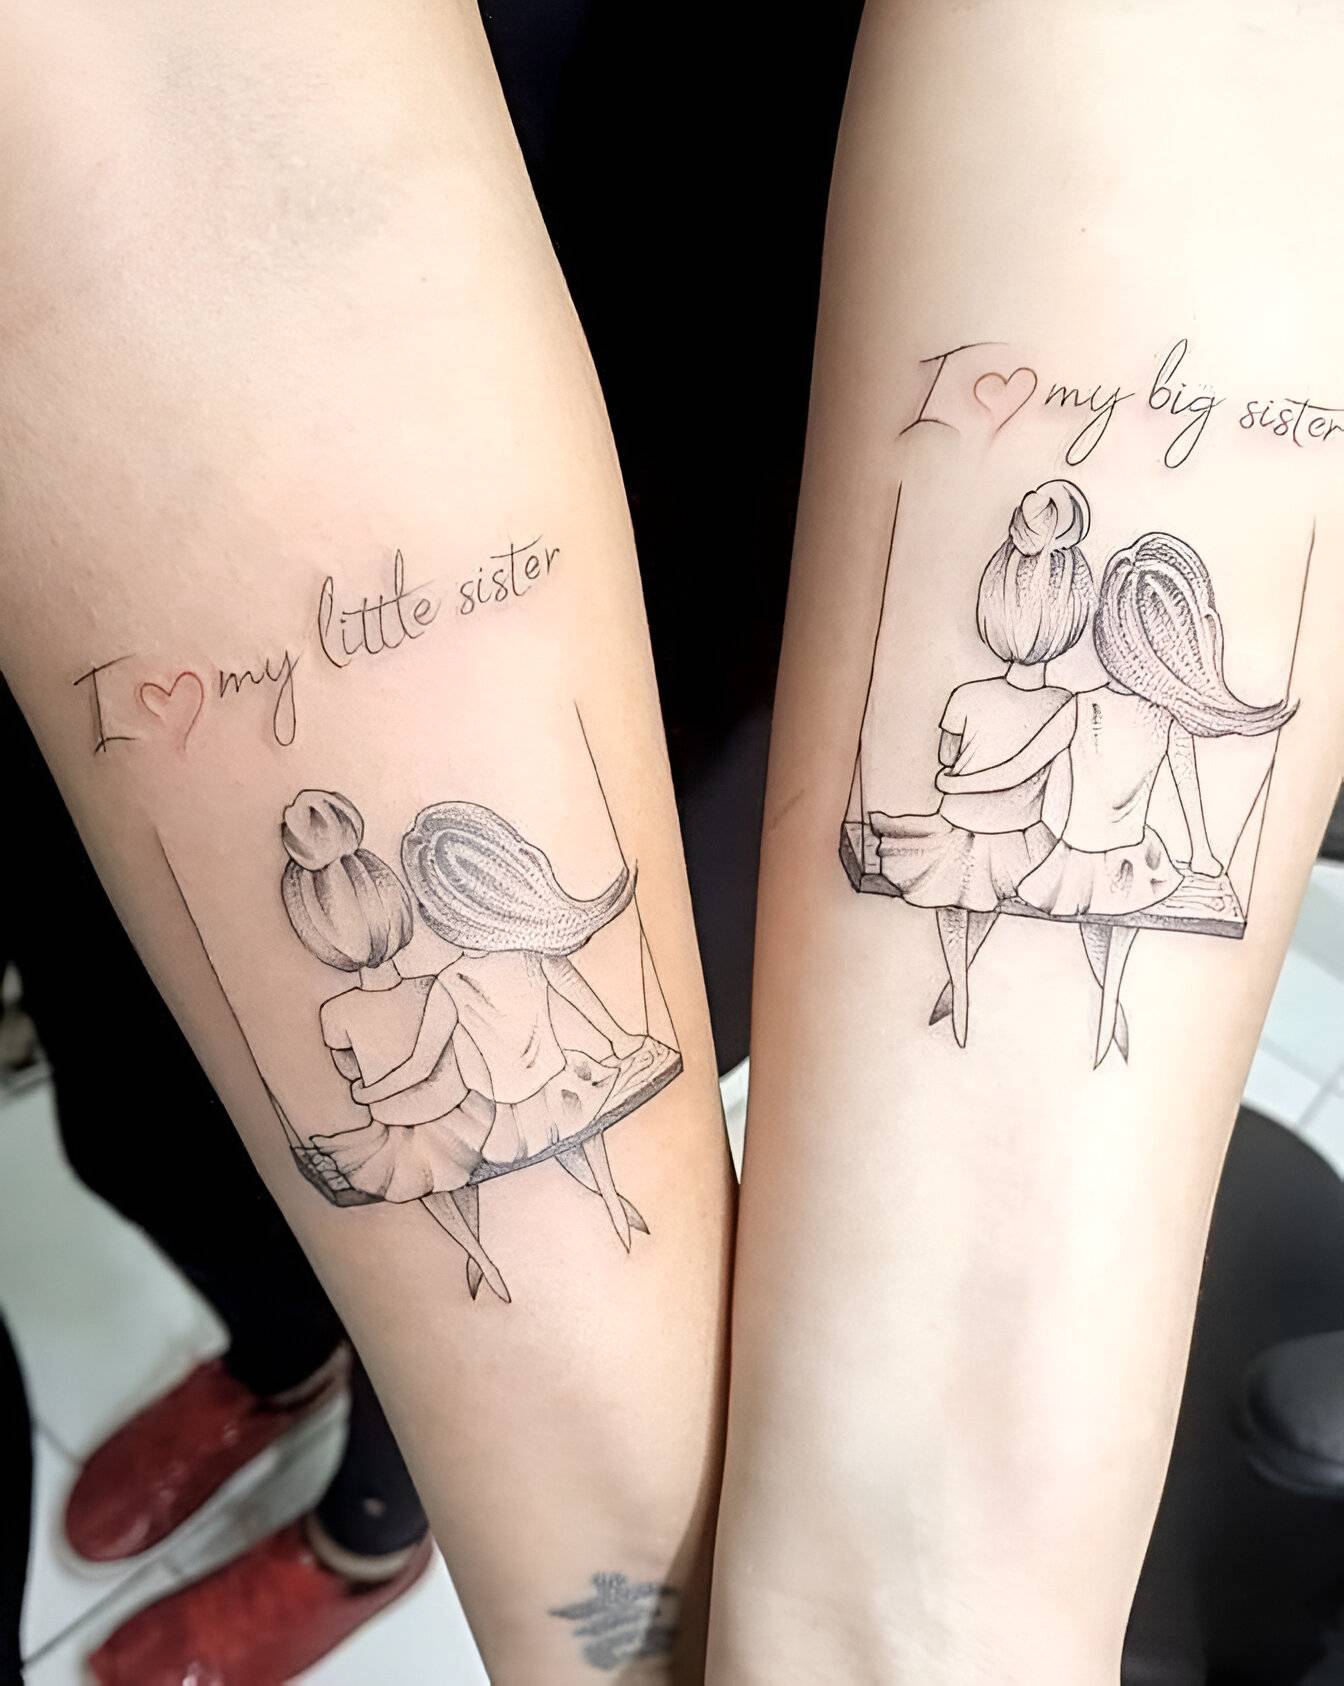 27 Feminine Best Friend Tattoos With The Perfect Elegant Touch 27